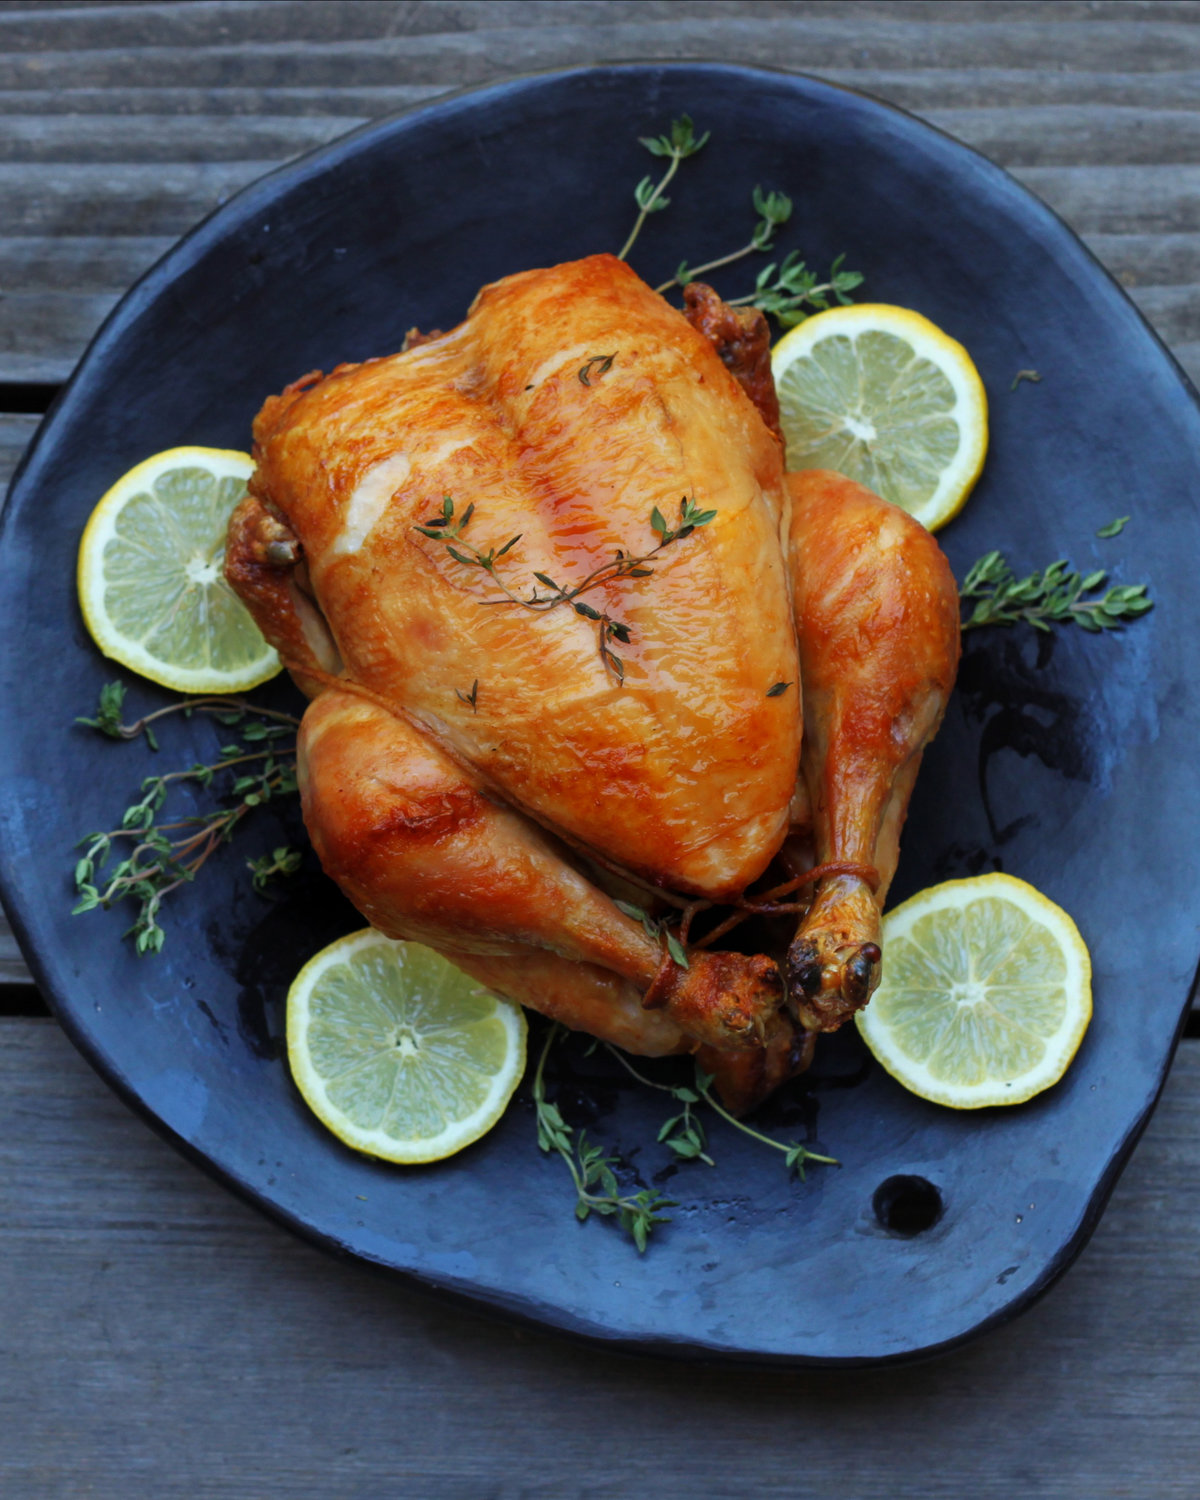 There is nothing more comforting than the aroma of a chicken roasting. Cooking a whole bird is quite simple, and can be done in an oven or on a grill.